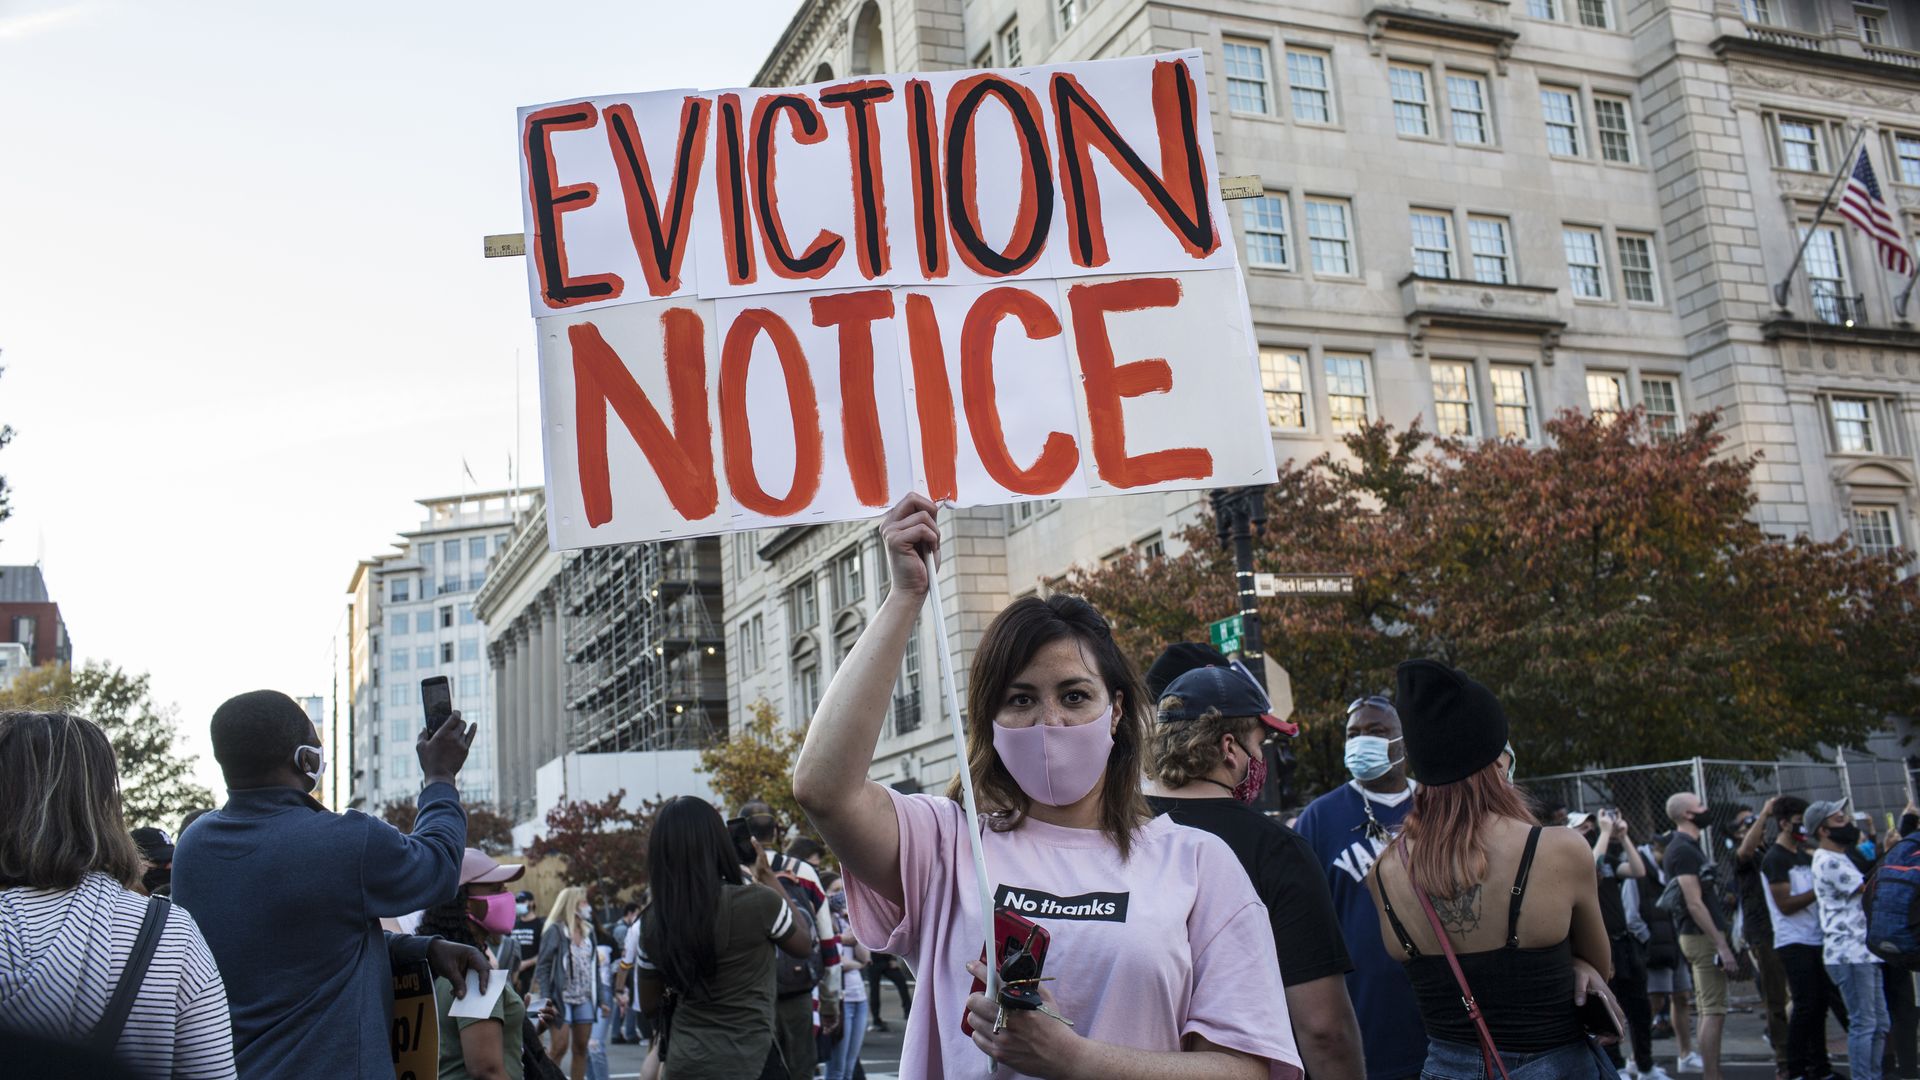 Picture of a woman holding a sign that says "Eviction Notice" in the middle of the street, surrounded by Black Lives Matter protesters 